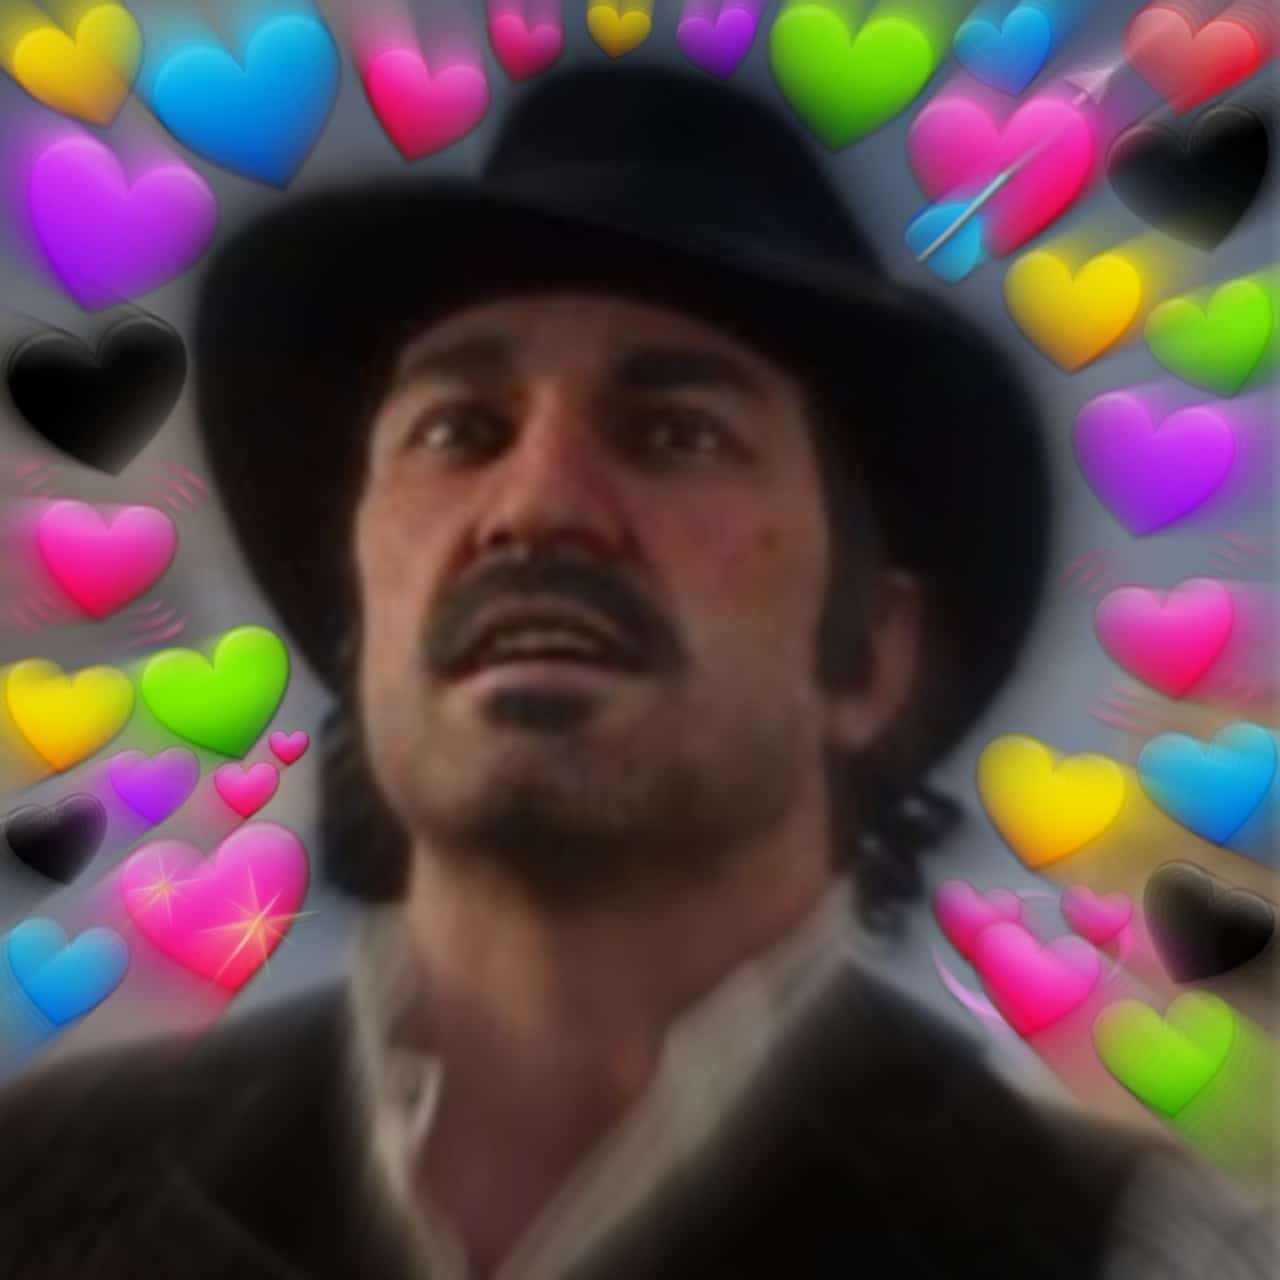 From Red Dead Redemption 2